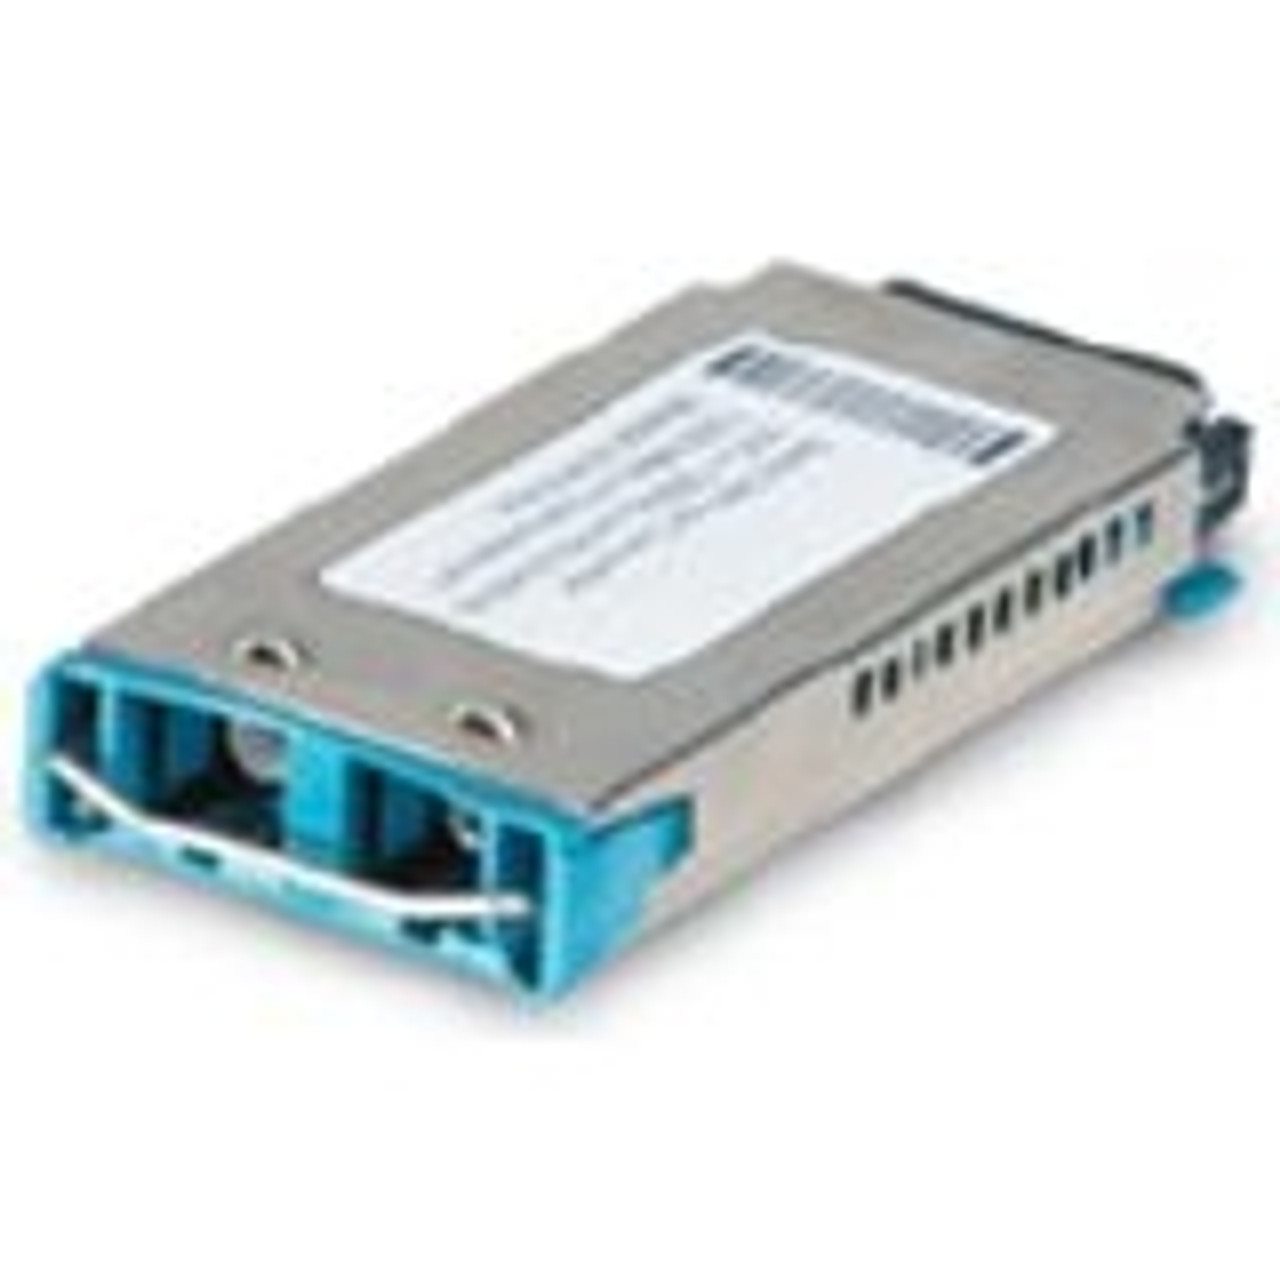 990-01999-05 Allied Telesis AT-G8ZX70 1.25Gbps 1000Base-ZX Single-mode Fiber 70km 1510nm SC Connector GBIC Transceiver Module